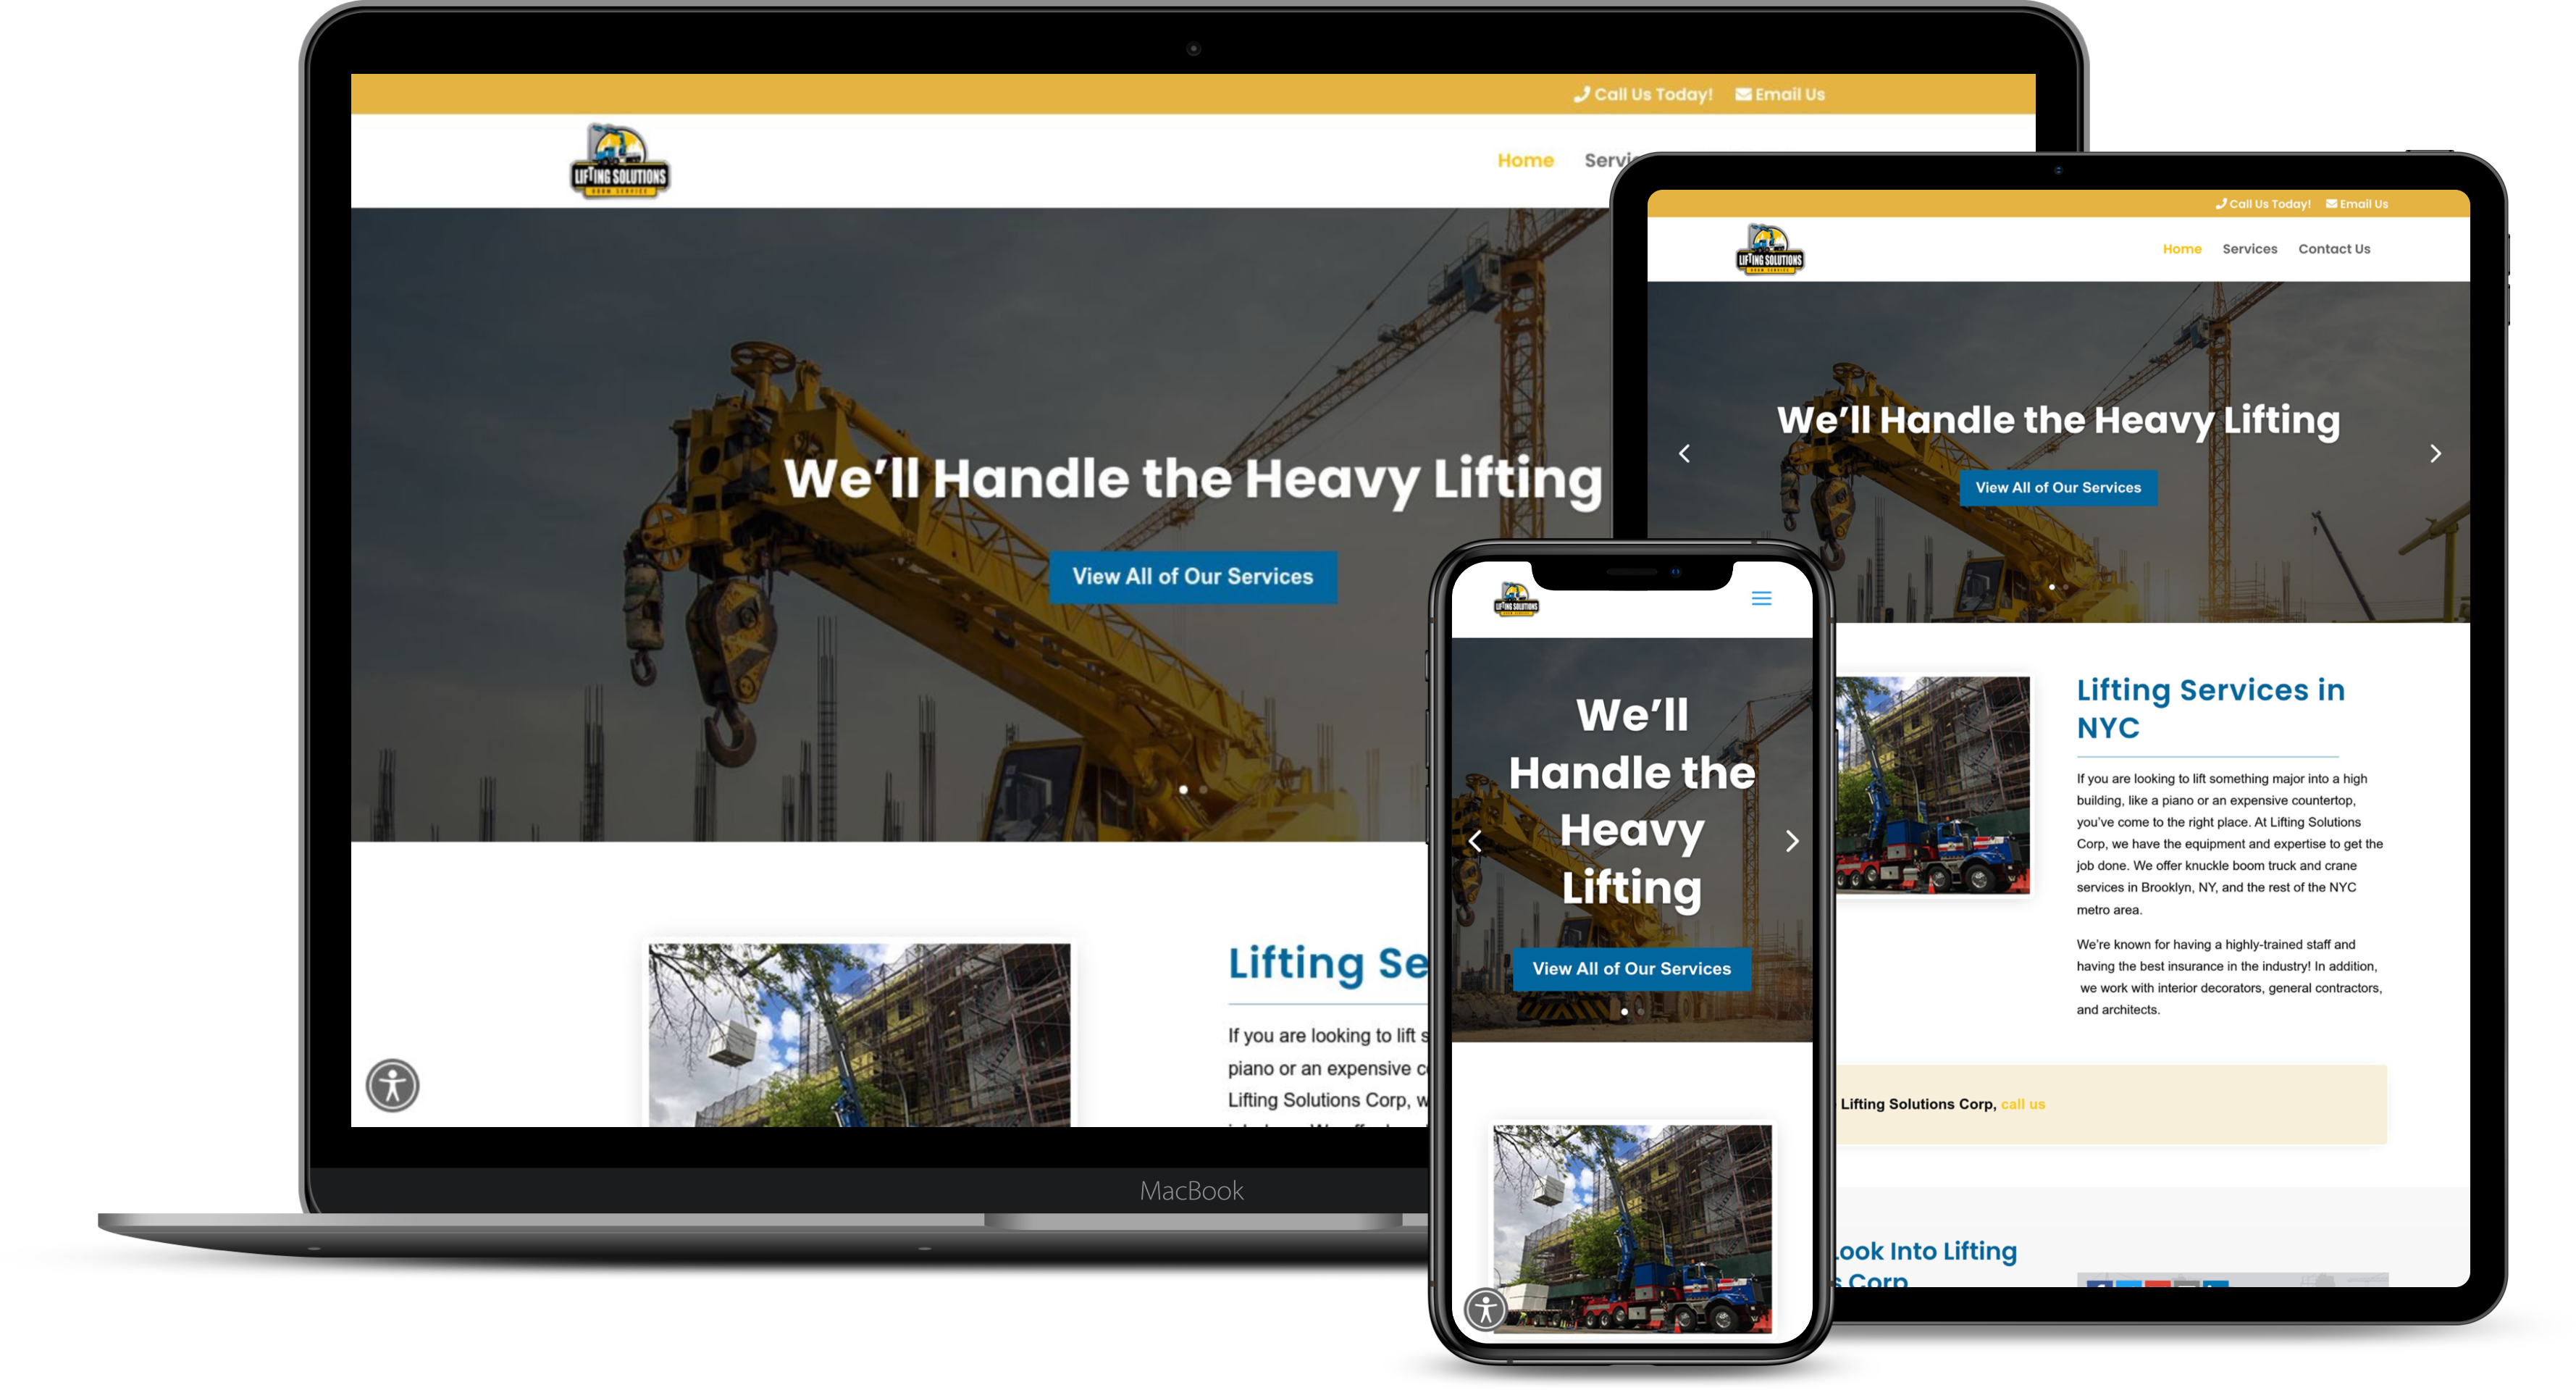 Lifting Solutions Corp